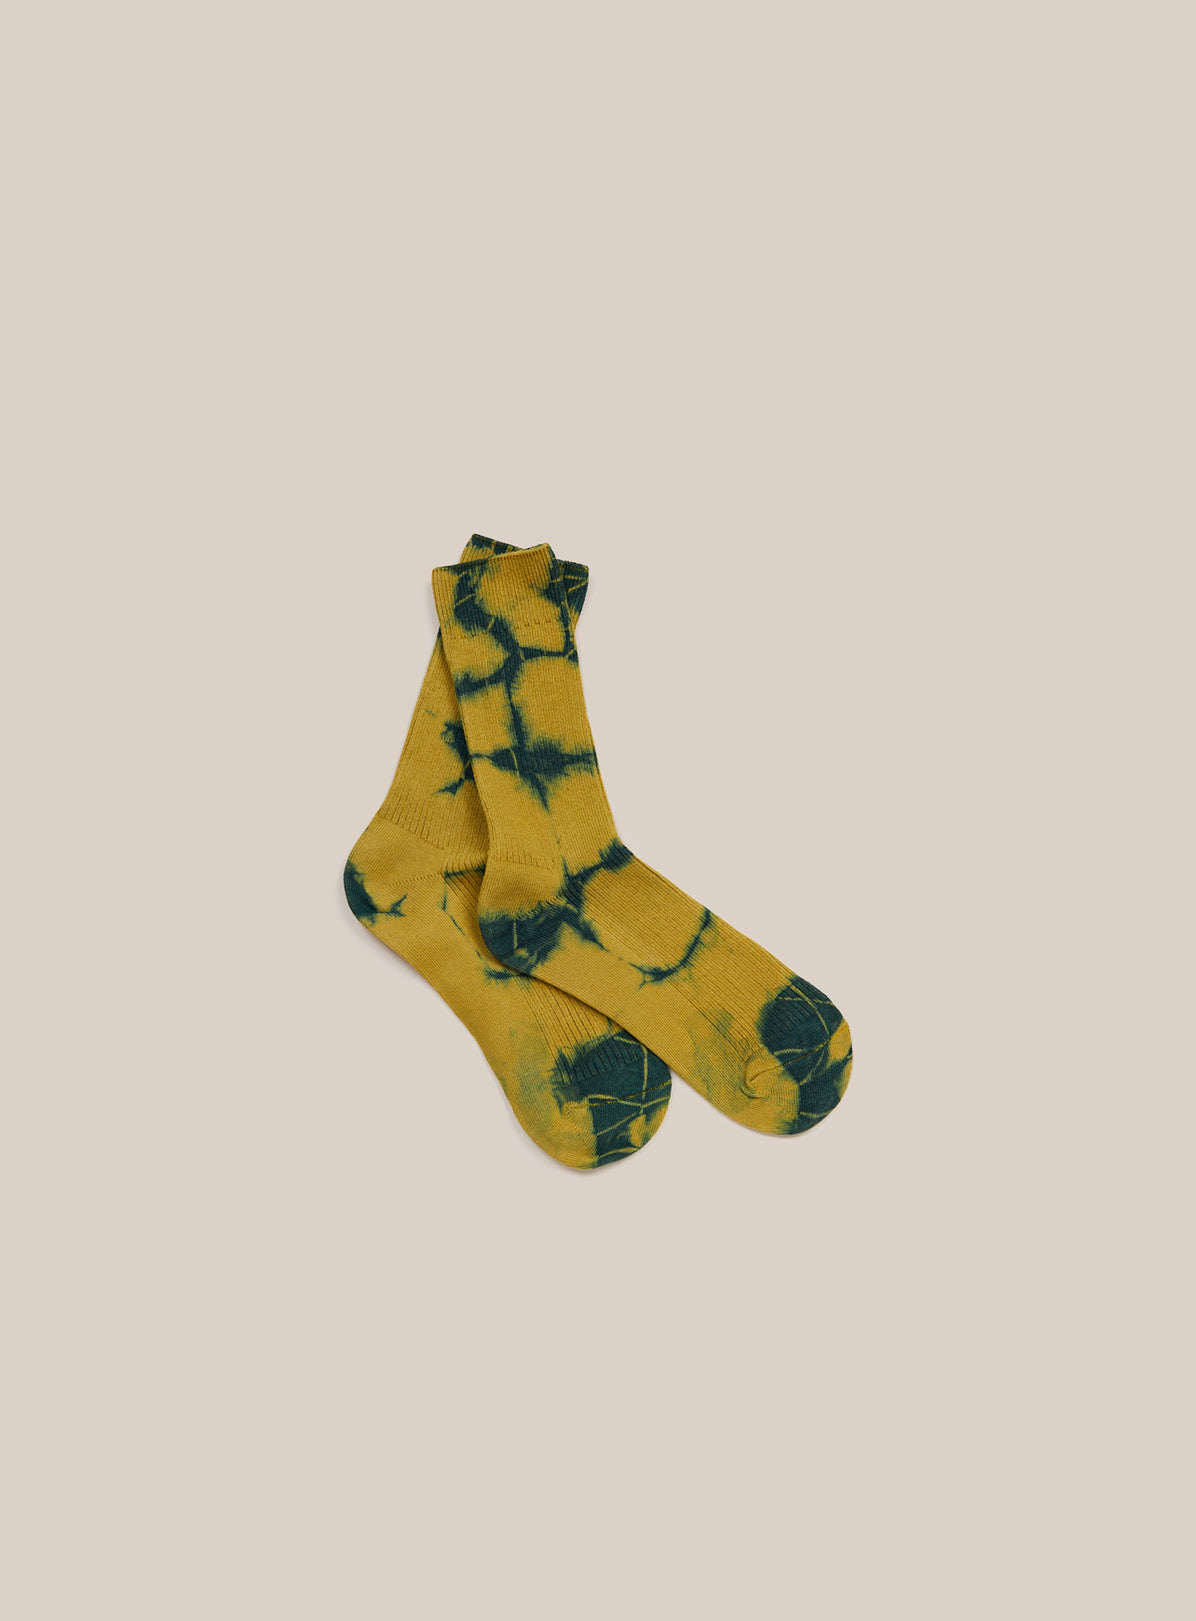 Hand Tie-Dyed Mango Sock By Philip Huang